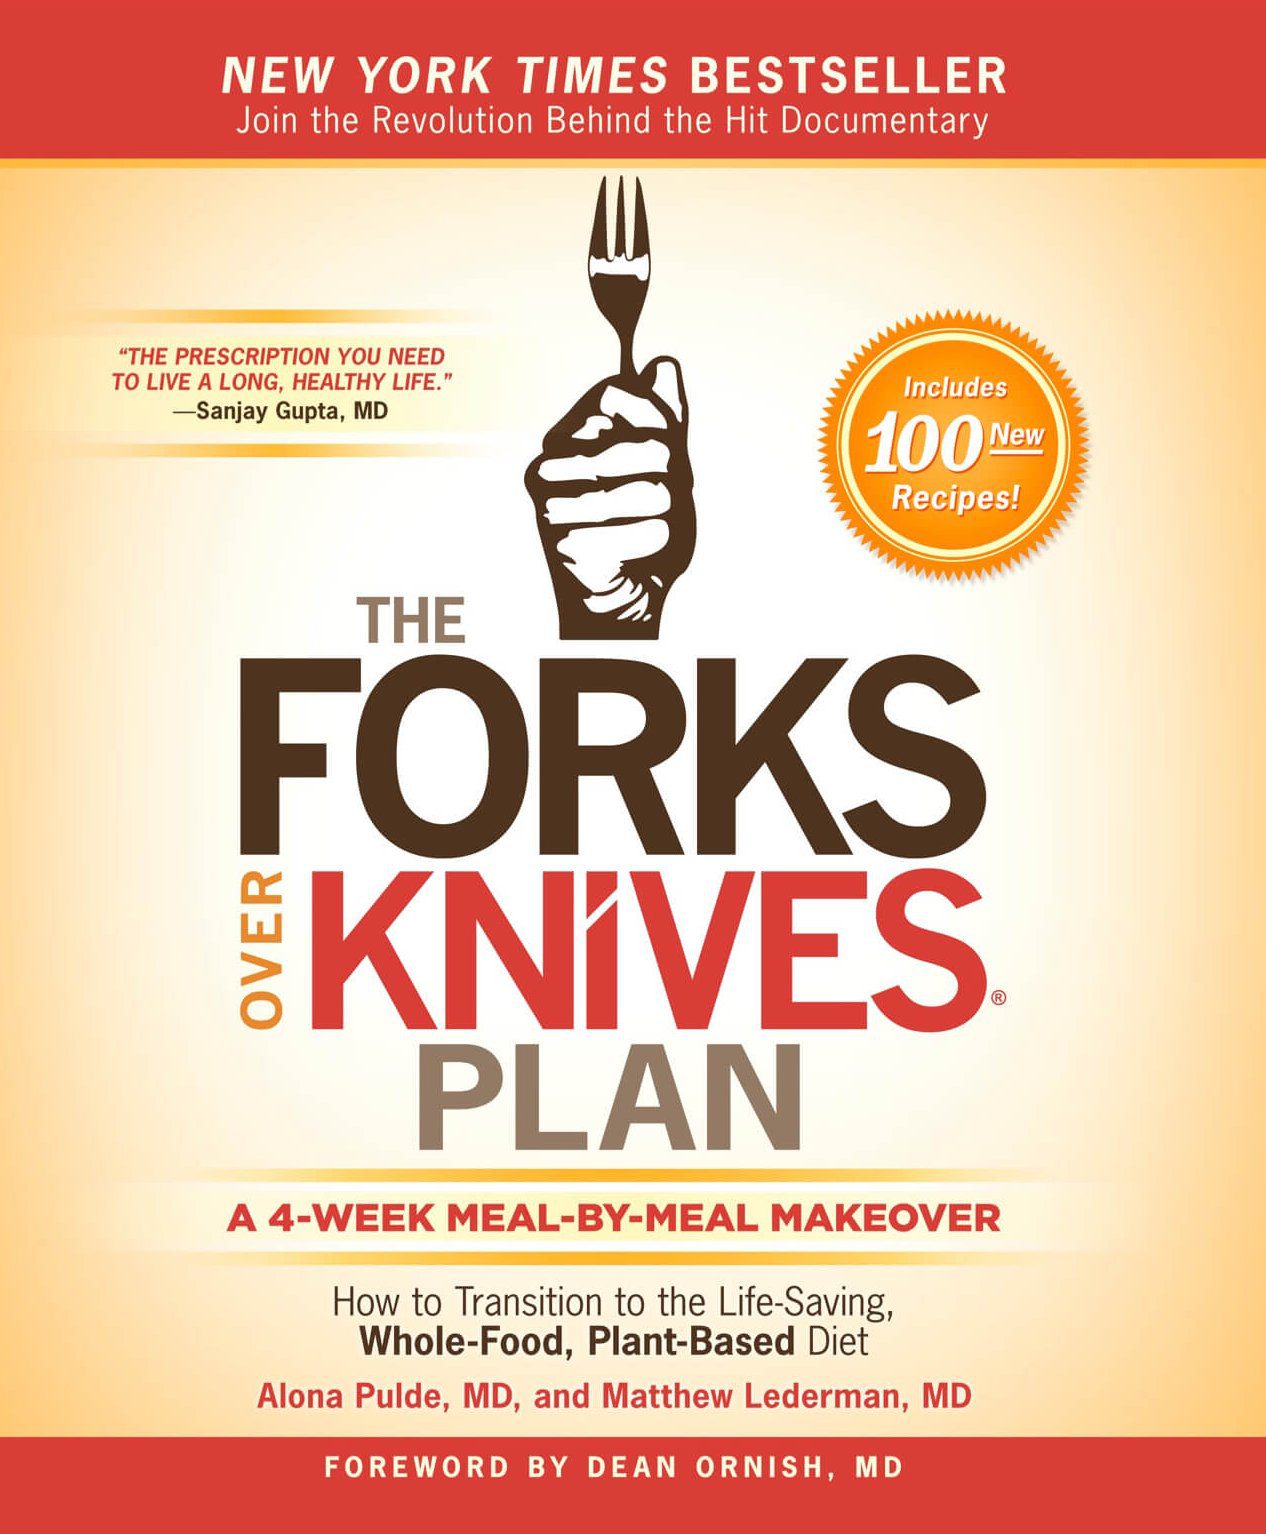 what is the forks over knives diet?